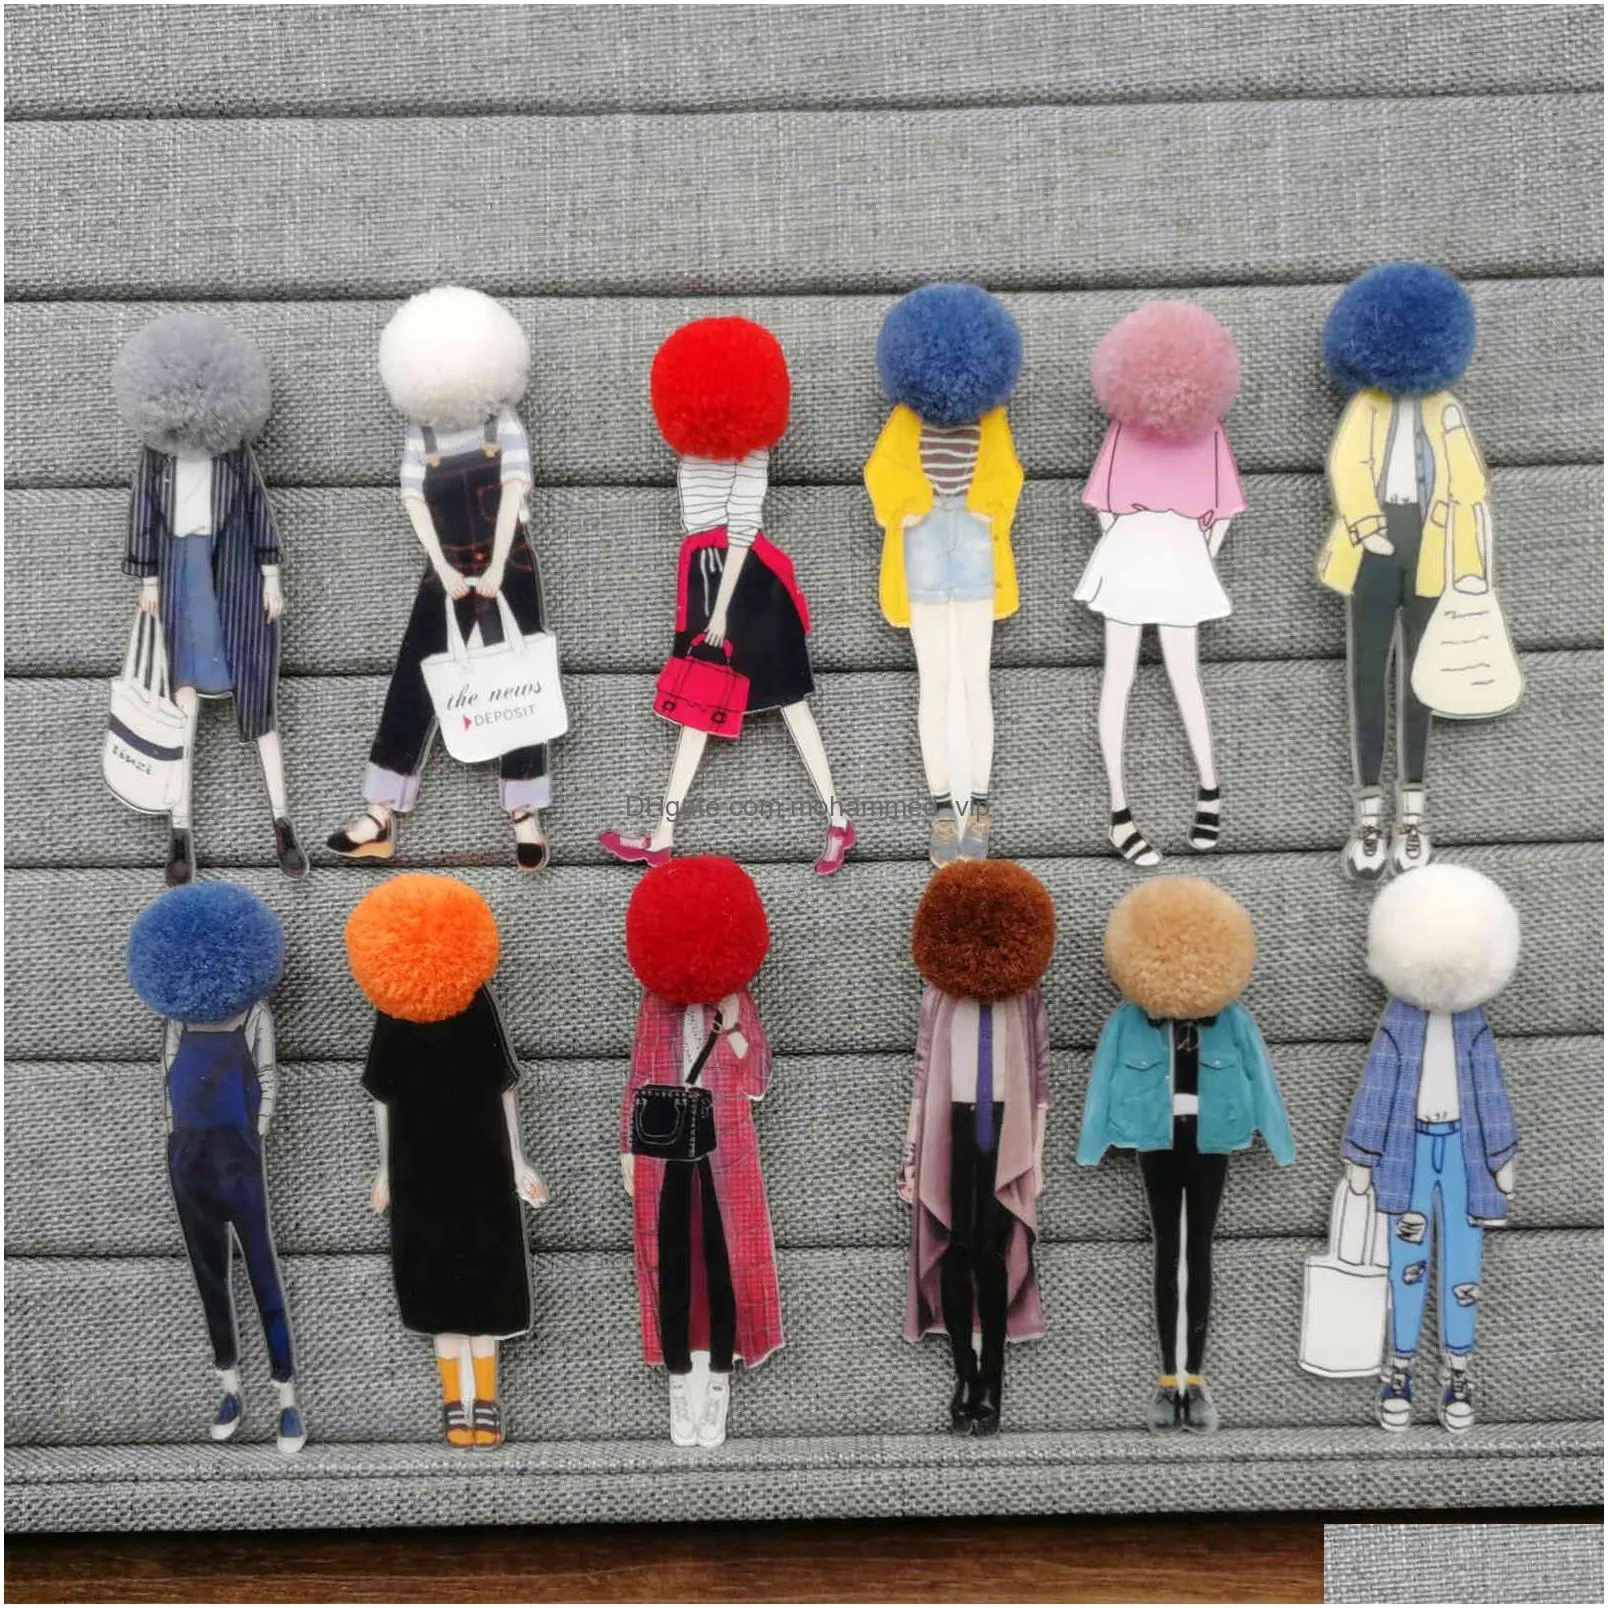 fashion pins for woman es girls cartoon models acrylic brooch wool hat clothing jewelry accessories christmas gifts